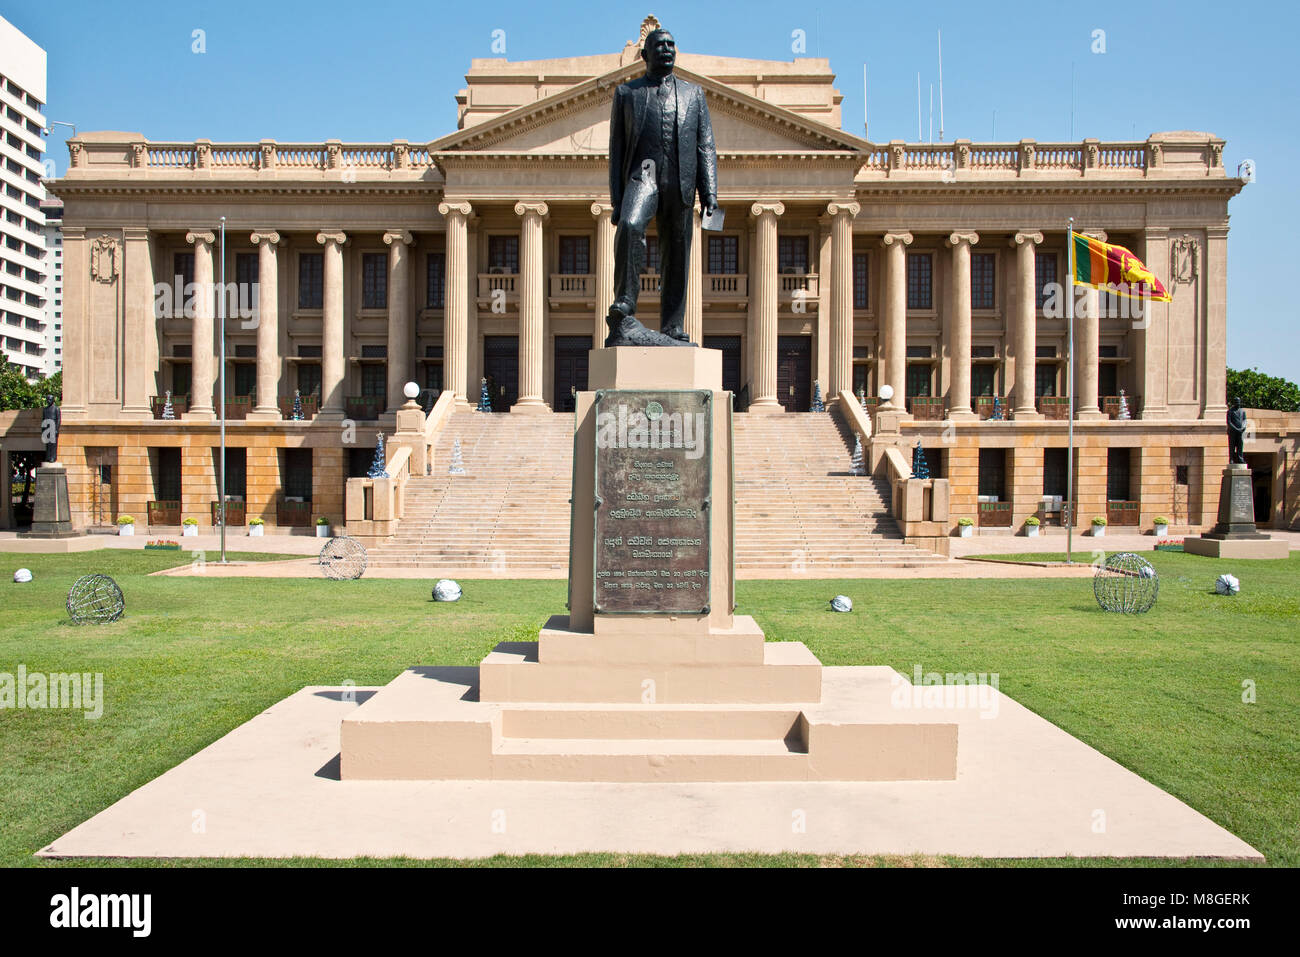 The Old Parliament Building in Colombo with the statue of the Rt Hon D. S. Senanayake (first Prime Minister of Ceylon) prominent. Stock Photo